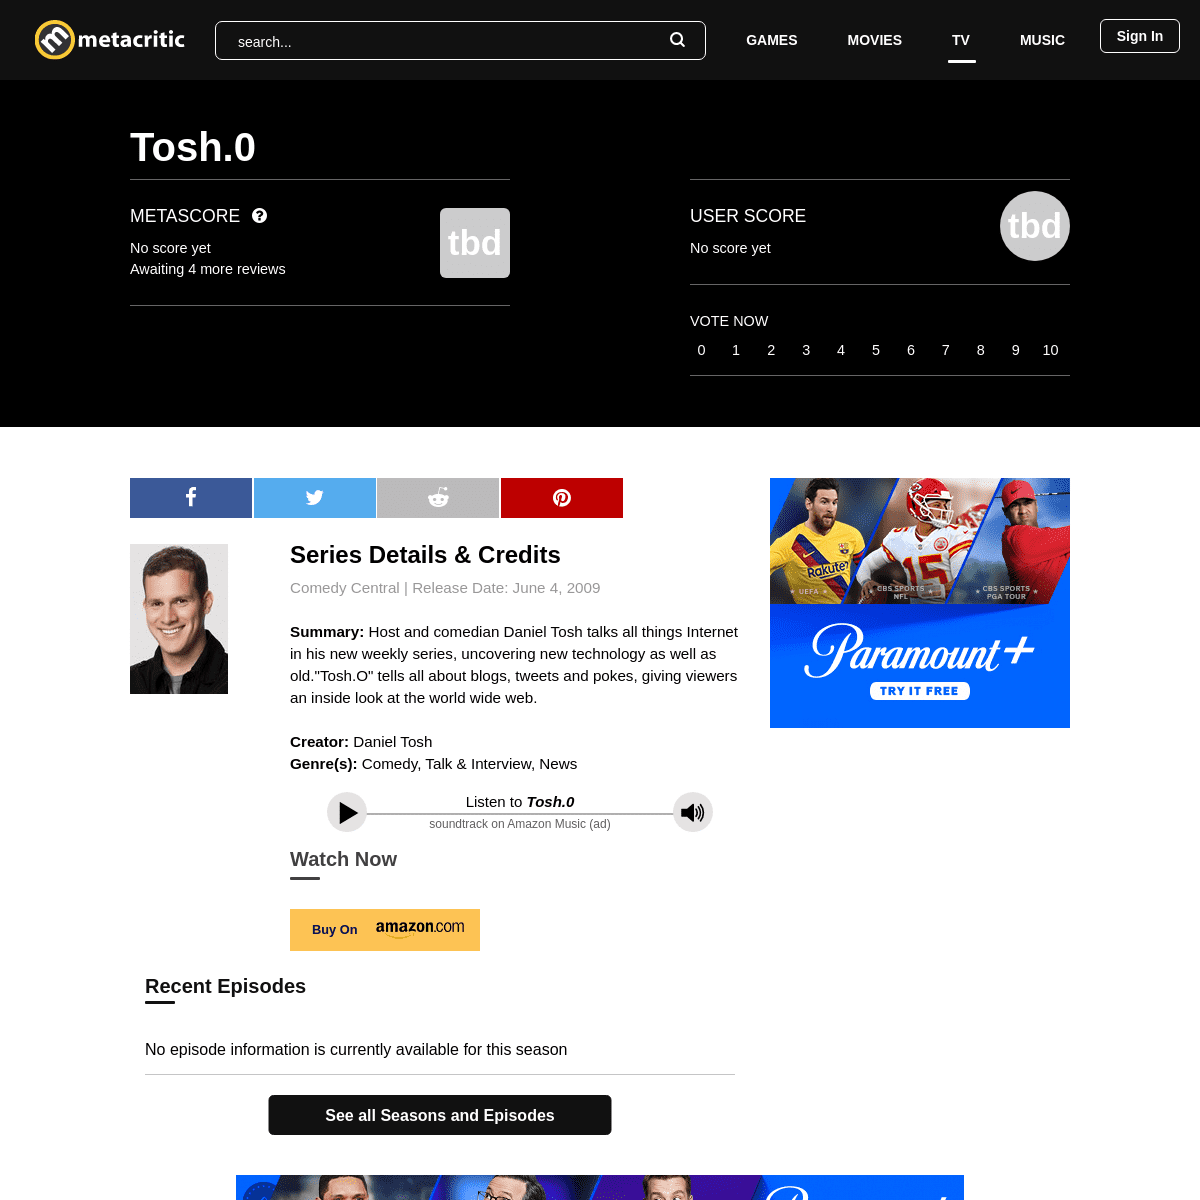 A complete backup of https://www.metacritic.com/tv/tosh0